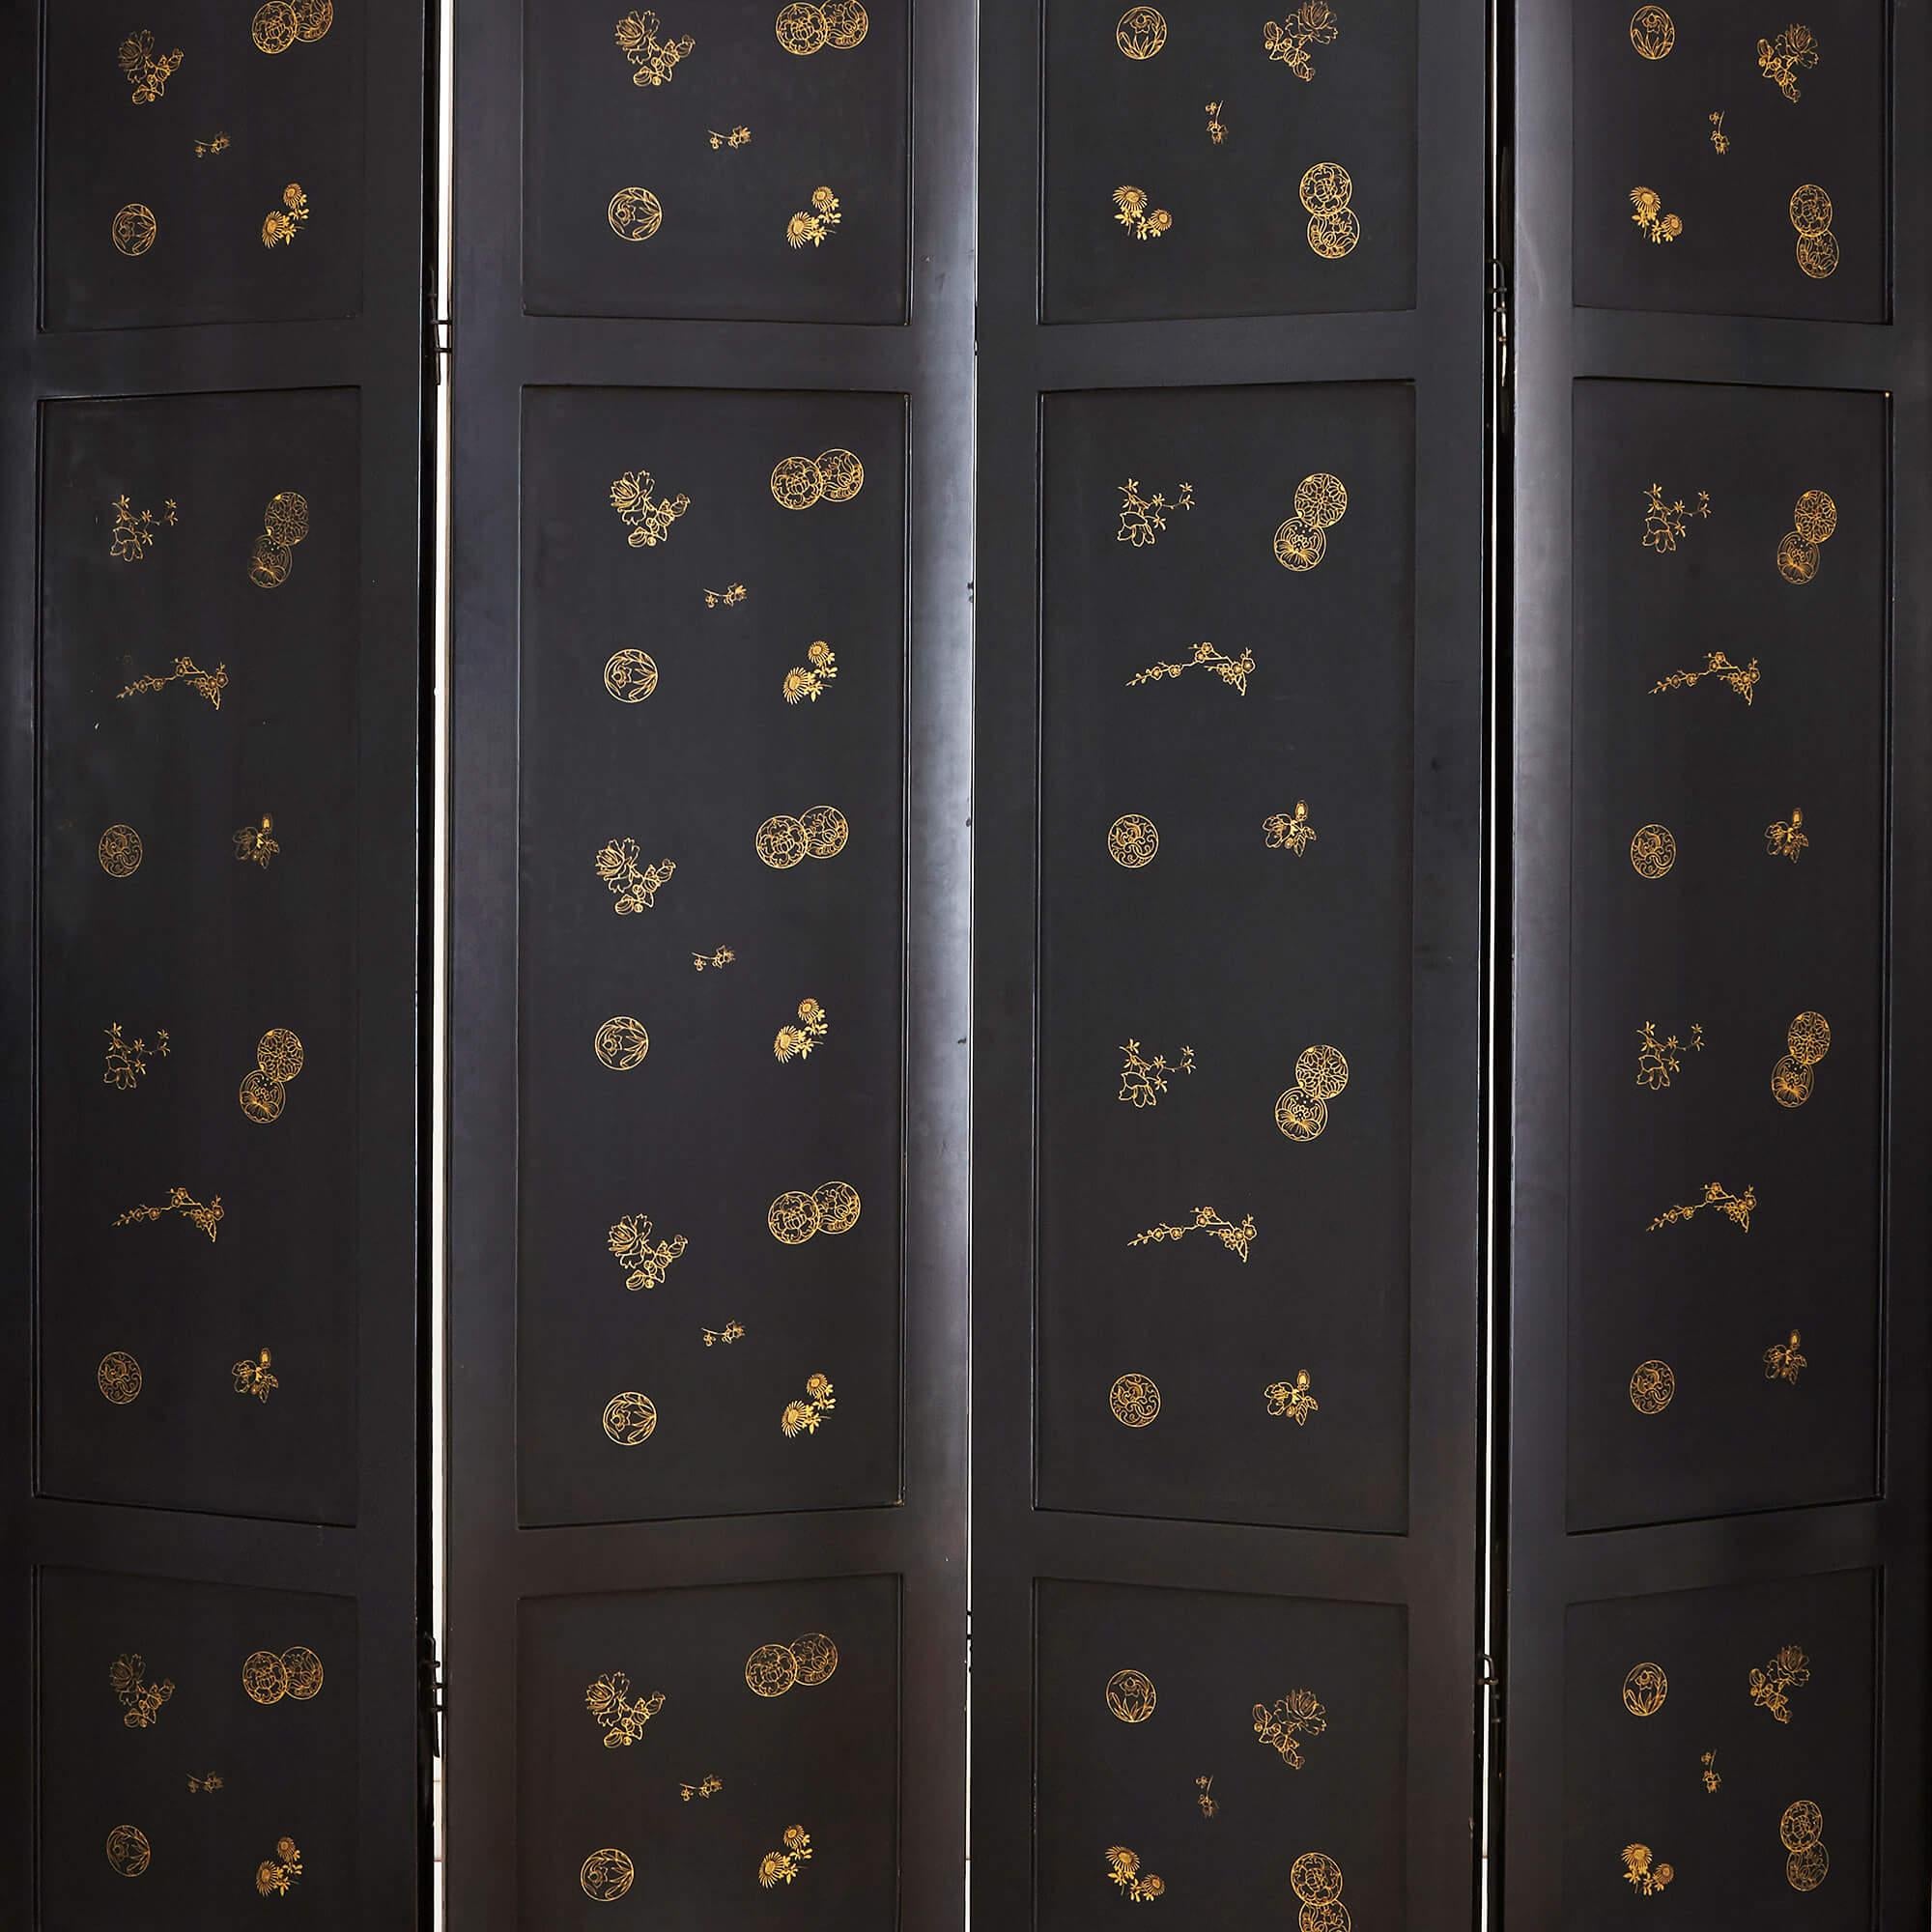 Stone Chinese Hardstone and Lacquer Folding Screen